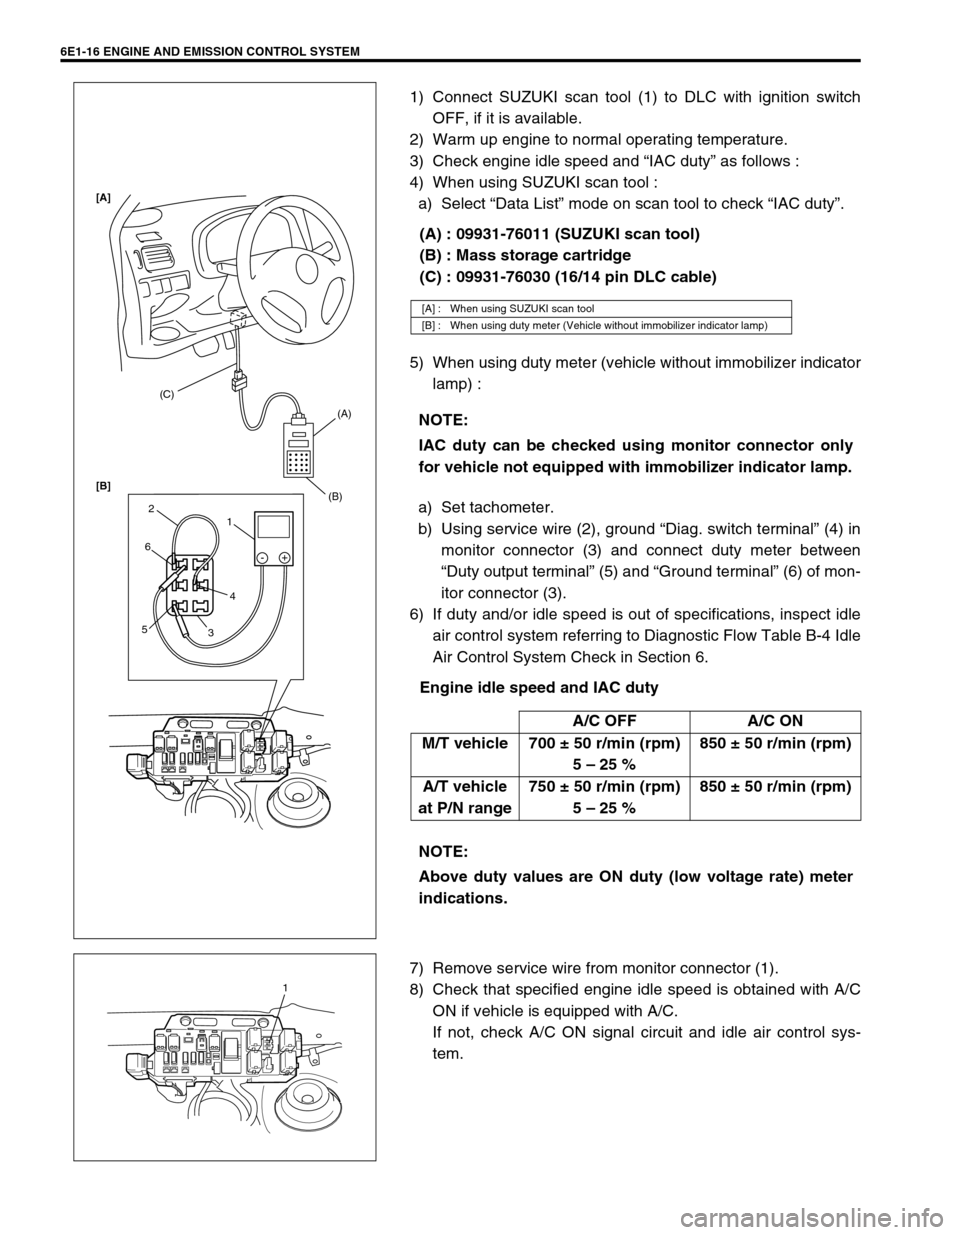 SUZUKI SWIFT 2000 1.G RG413 Service Workshop Manual 6E1-16 ENGINE AND EMISSION CONTROL SYSTEM
1) Connect SUZUKI scan tool (1) to DLC with ignition switch
OFF, if it is available.
2) Warm up engine to normal operating temperature.
3) Check engine idle s